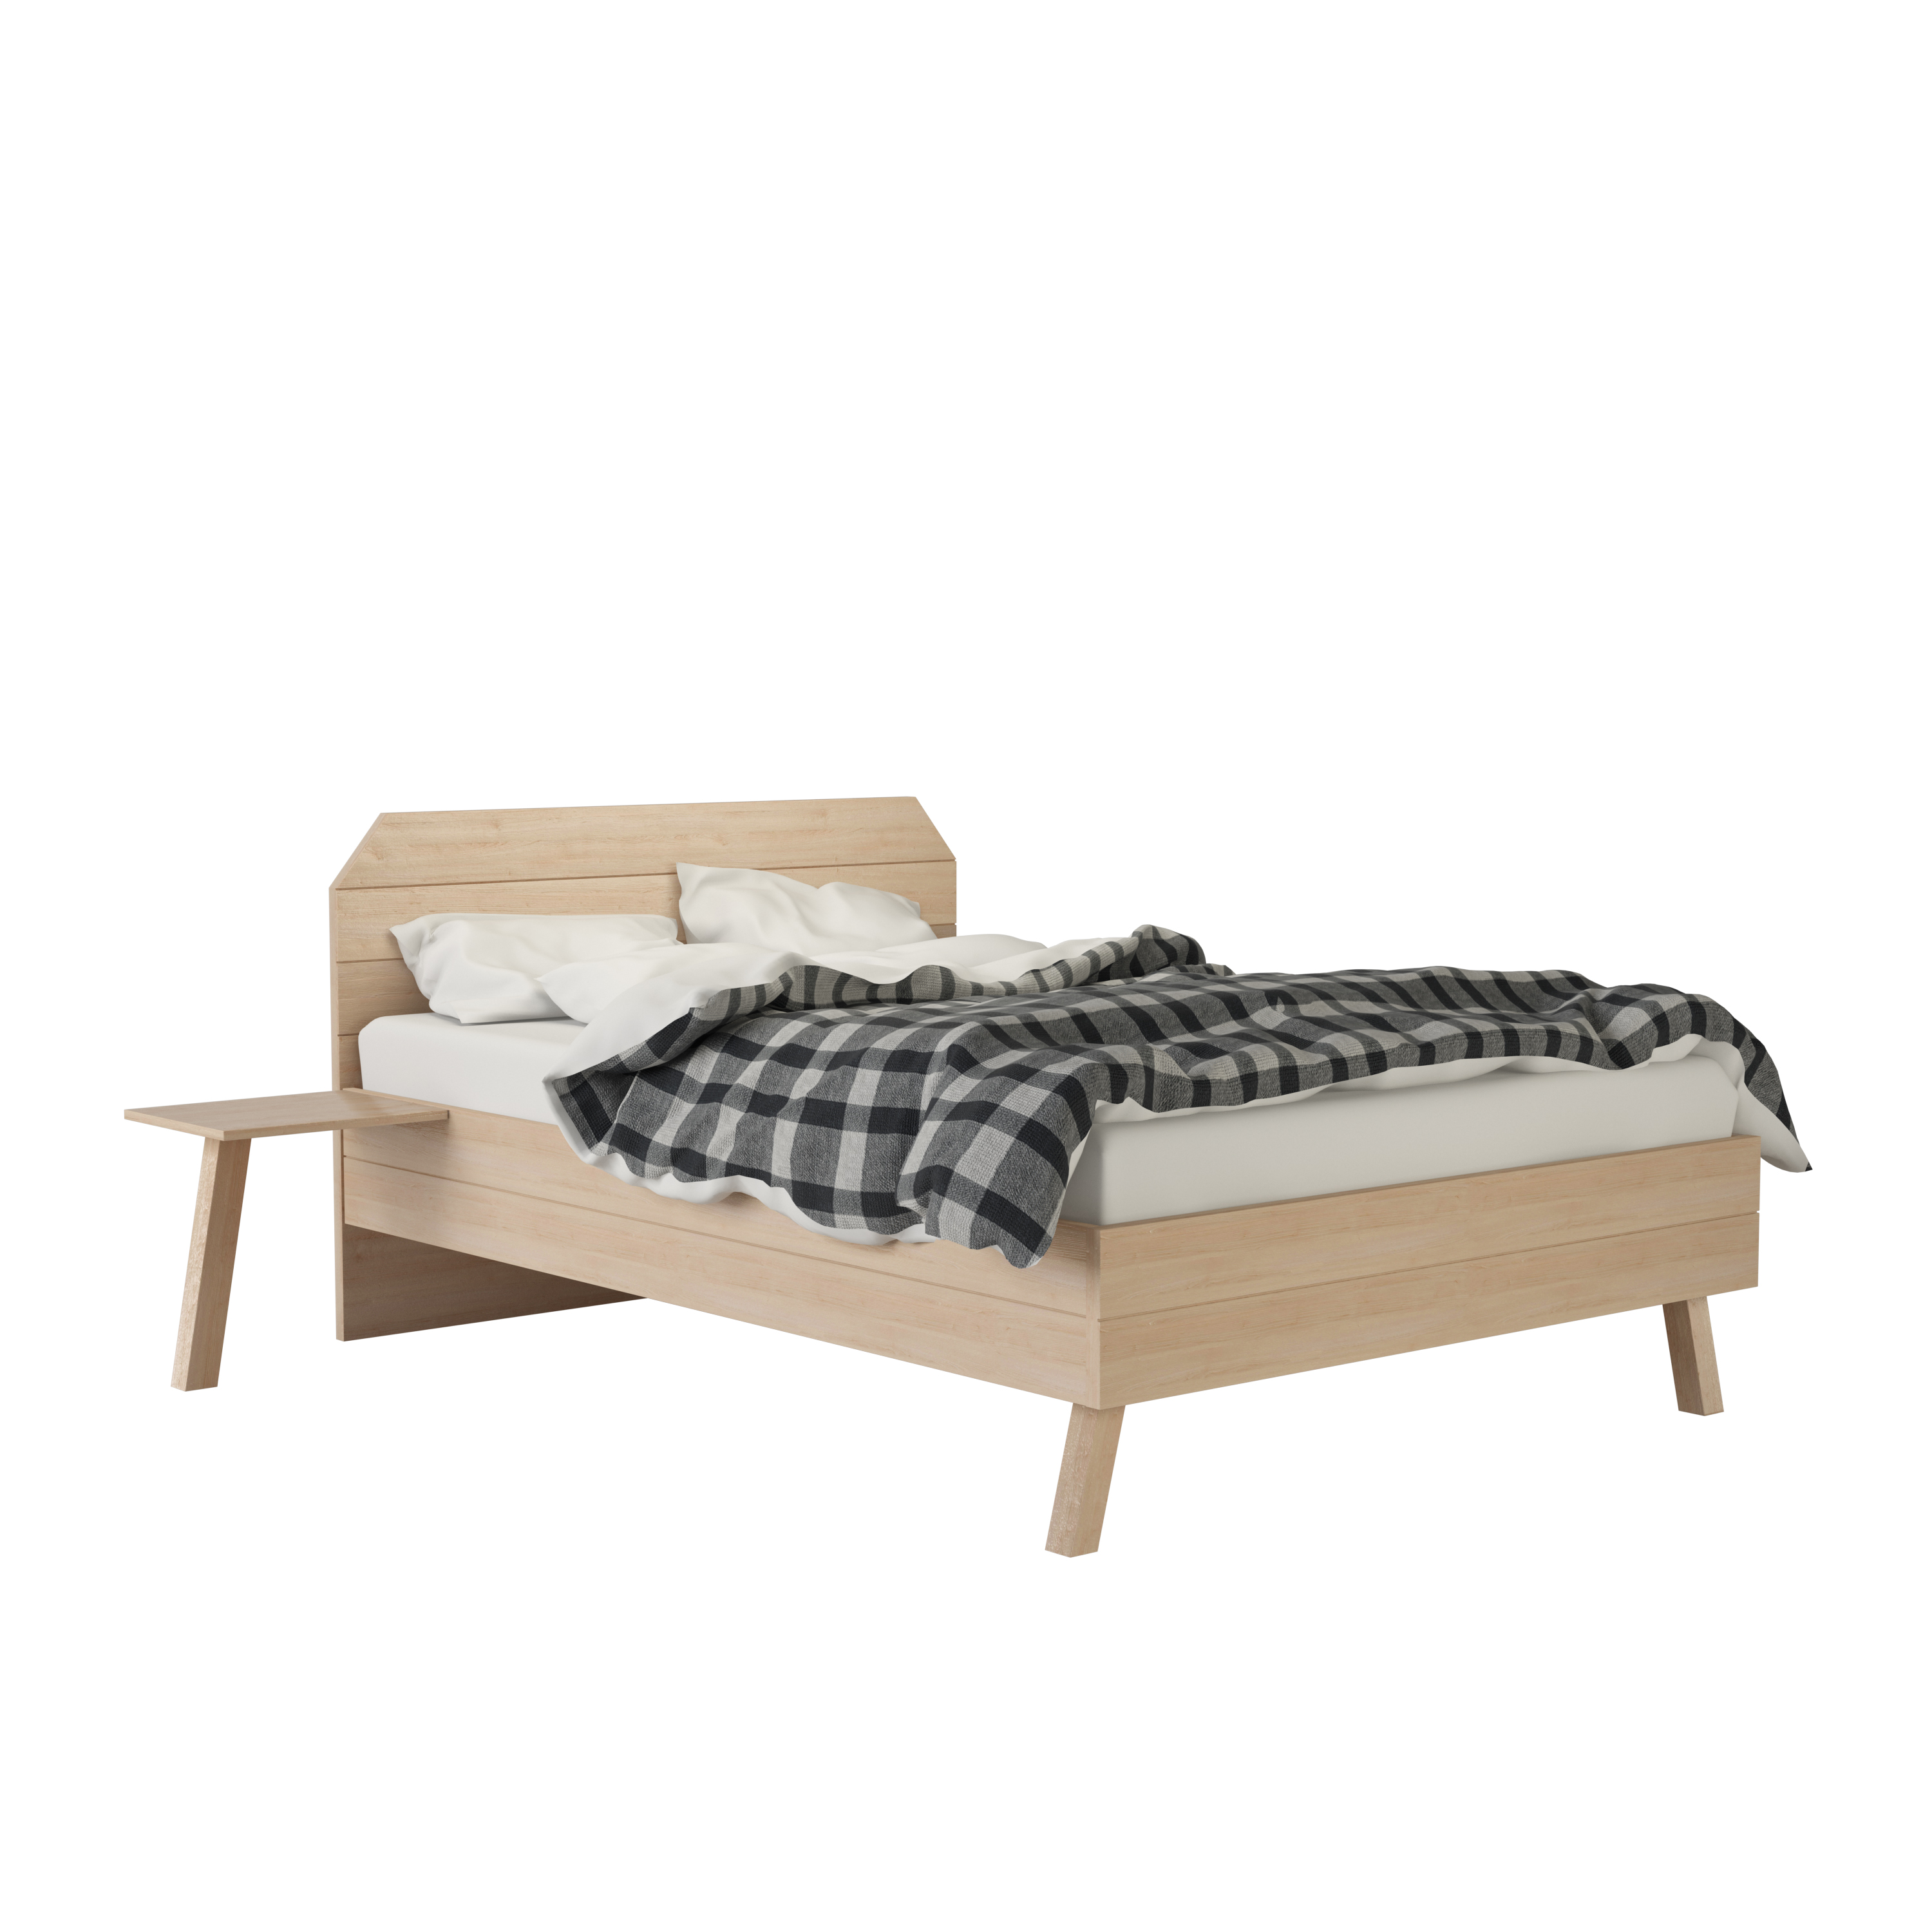 Ounce Korst Minimaal Juvo Narvik 2 persoons bed - Collectie